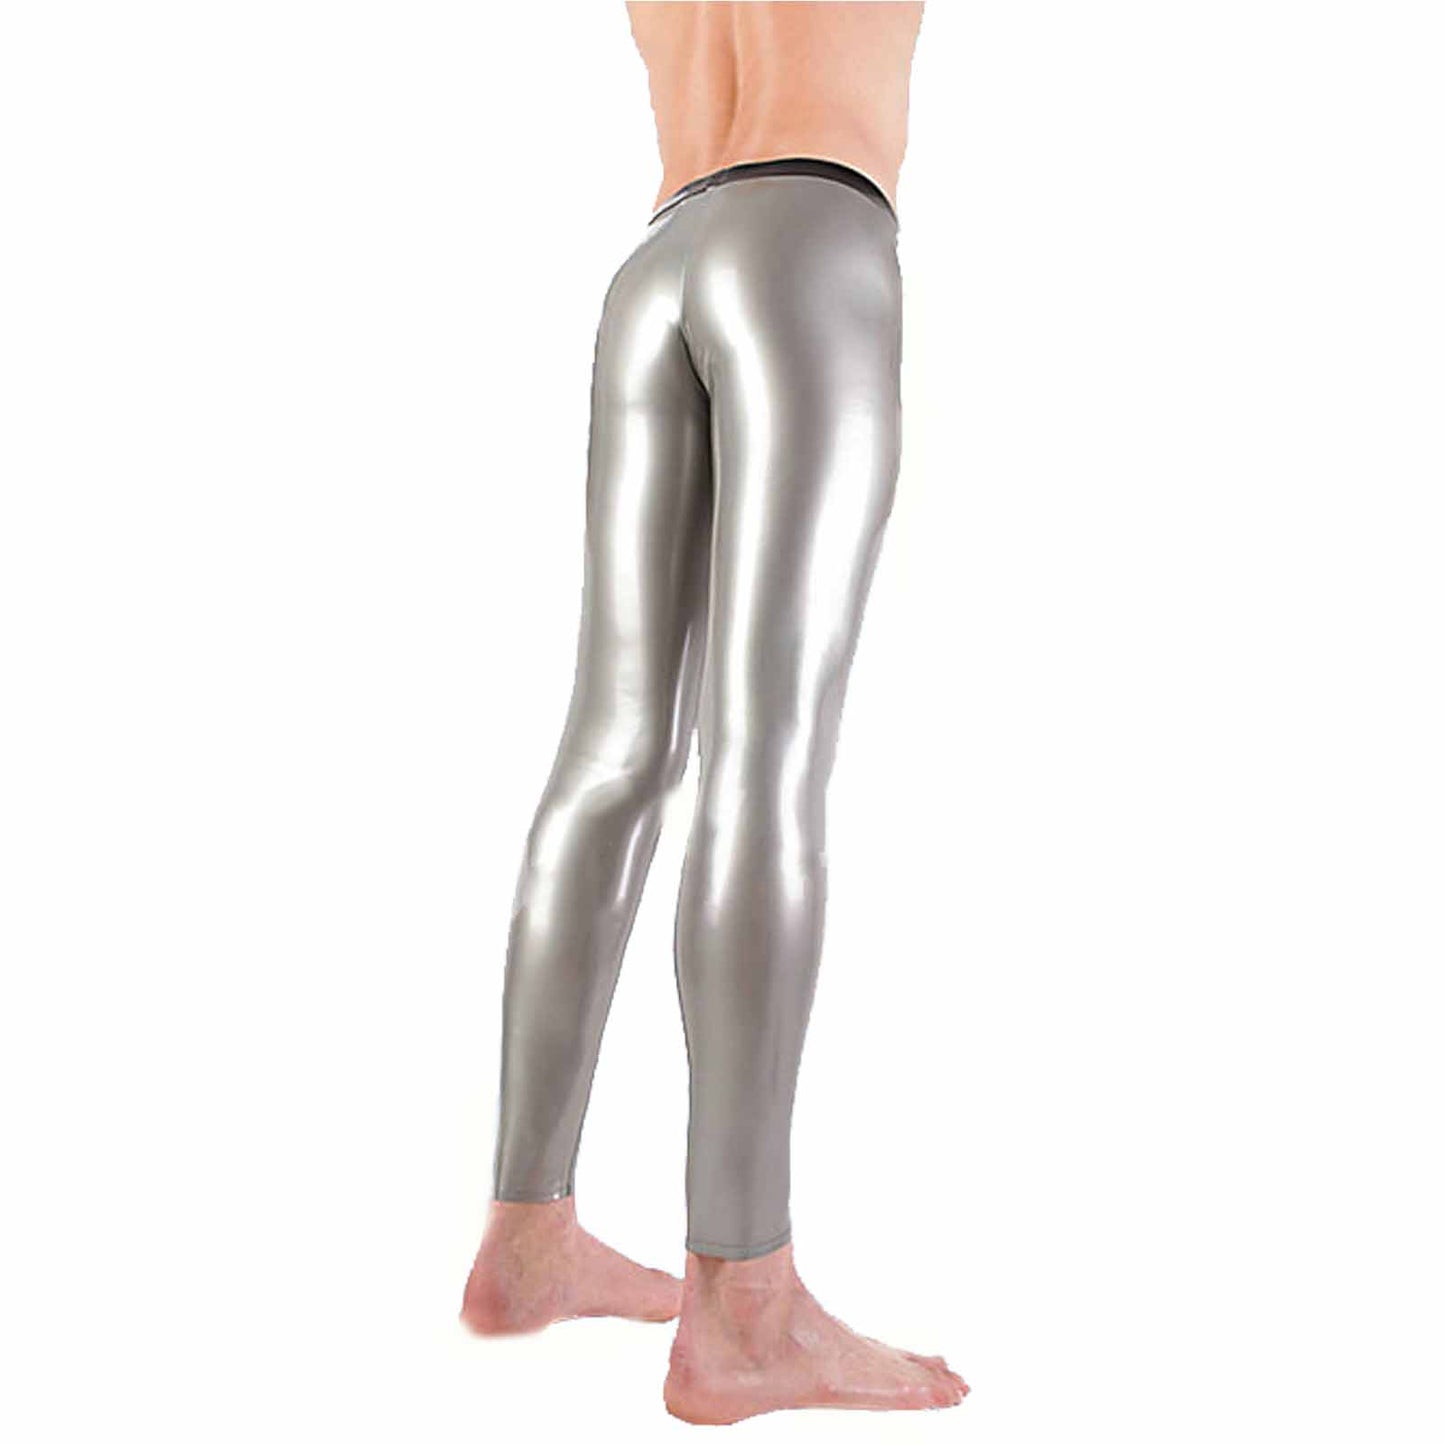 MONNIK Latex Unisex Gary Mid-pants with Black Trim Tights for Bodysuit Party Clubwear